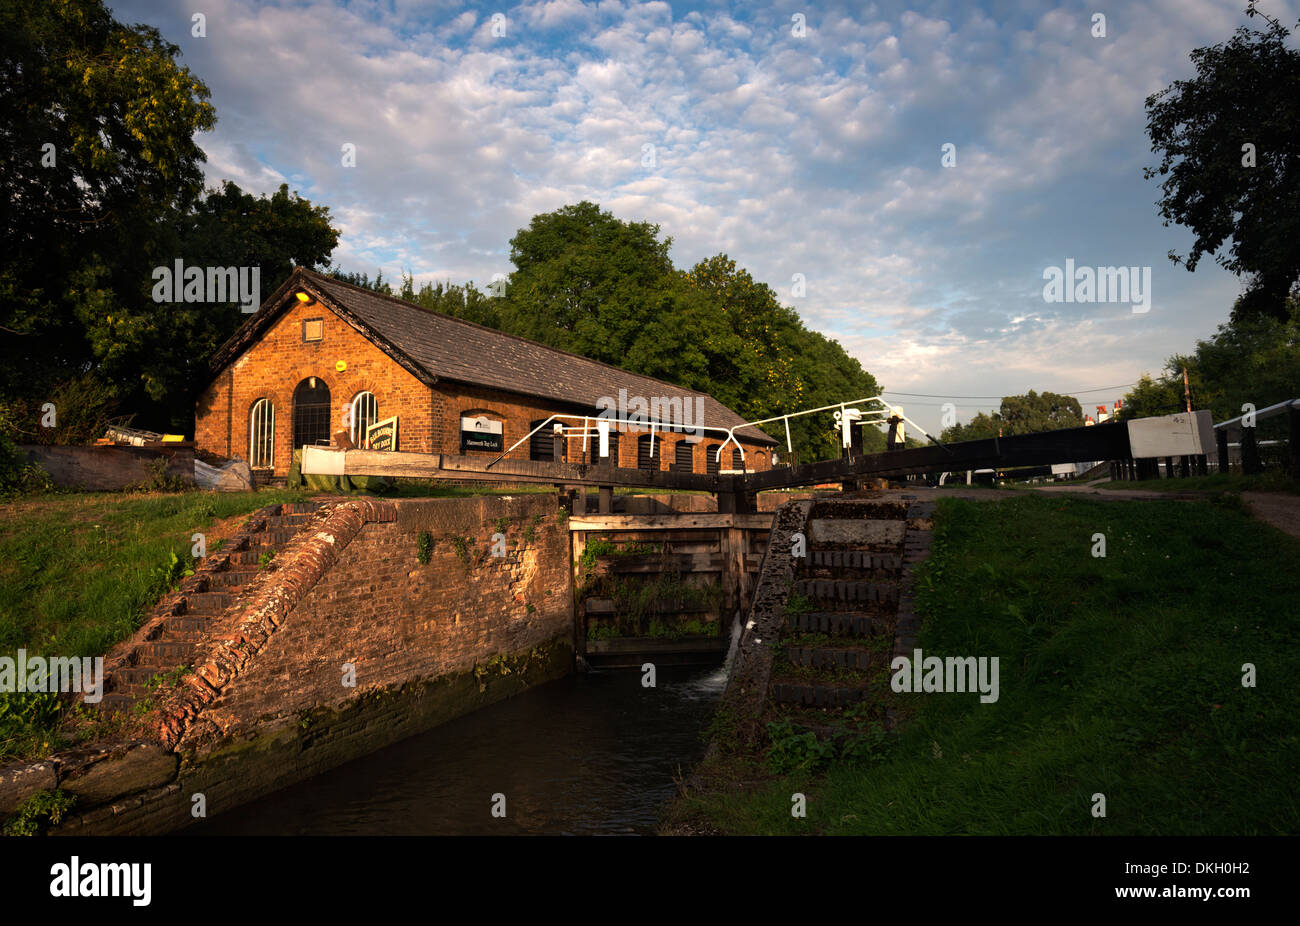 Marsworth Top Lock No. 45 Bulbourne Grand Union Canal near Tring Herts UK Stock Photo